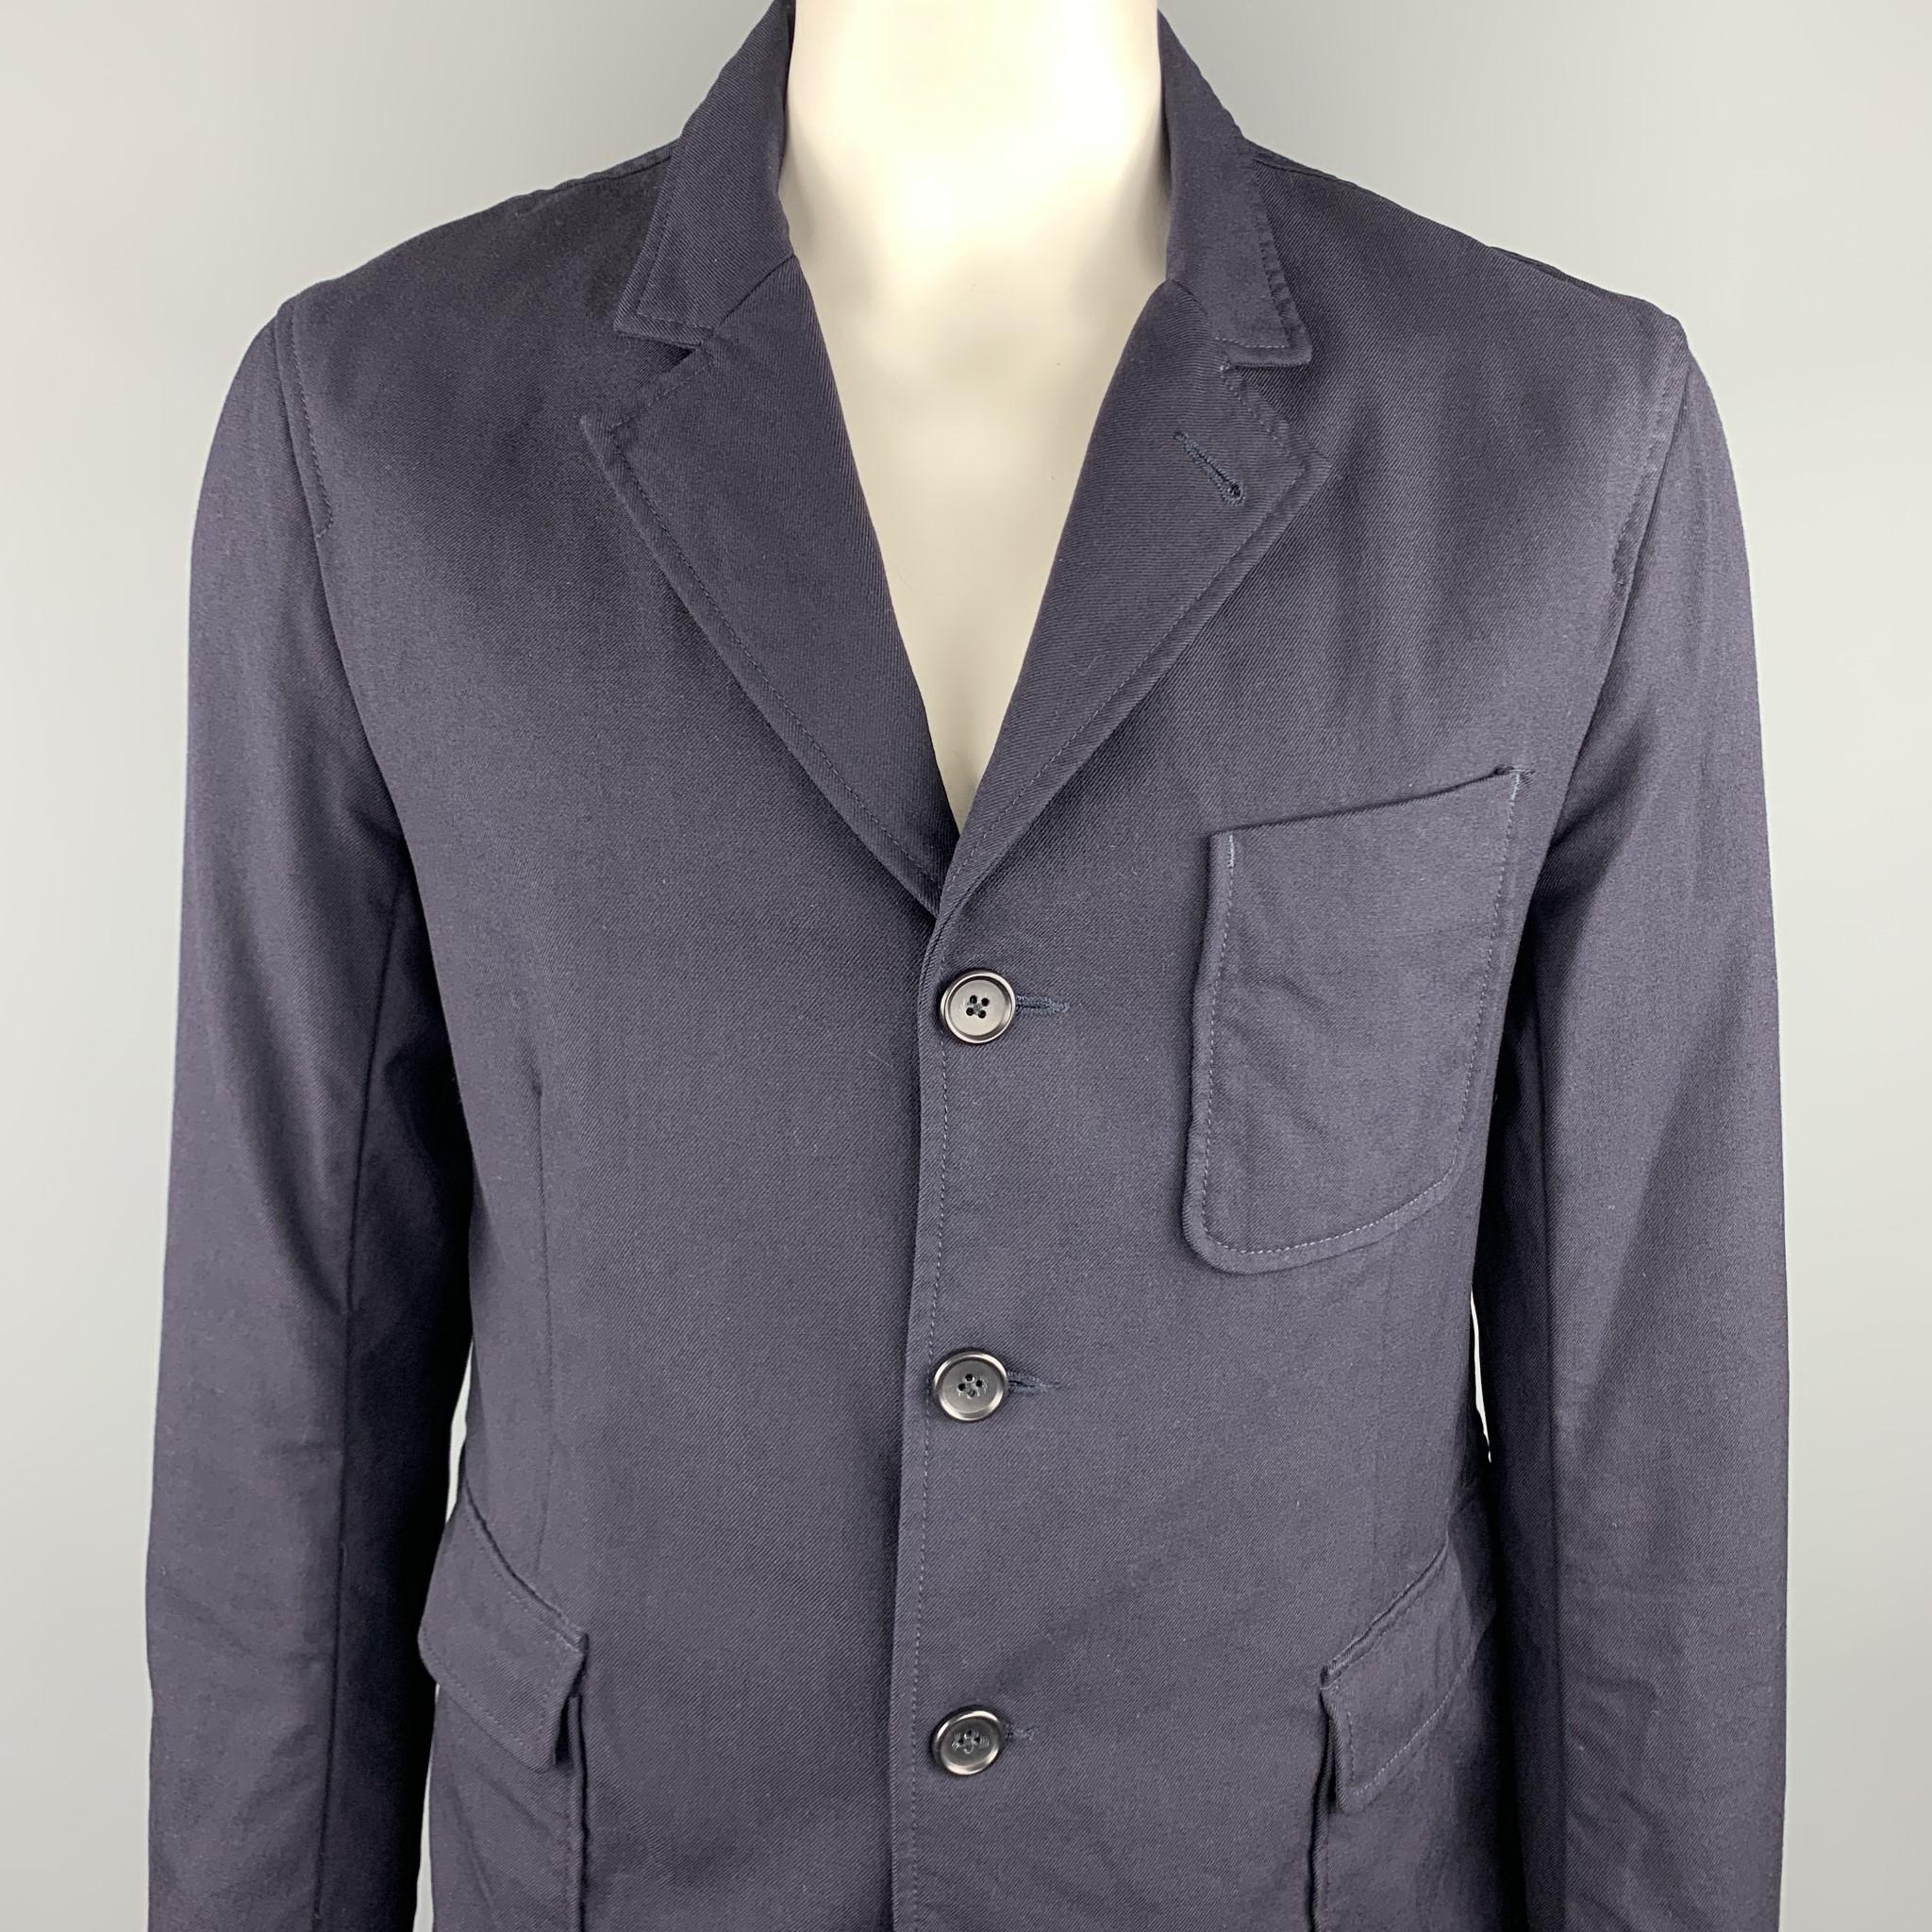 ENGINEERED GARMENTS sport coat comes in a navy wool featuring notch lapel style, patch pockets, and a buttoned closure. Made in USA. 

Excellent Pre-Owned Condition.
Marked: US XL

Measurements:

Shoulder: 18 in. 
Chest: 44 in. 
Sleeve: 27 in.